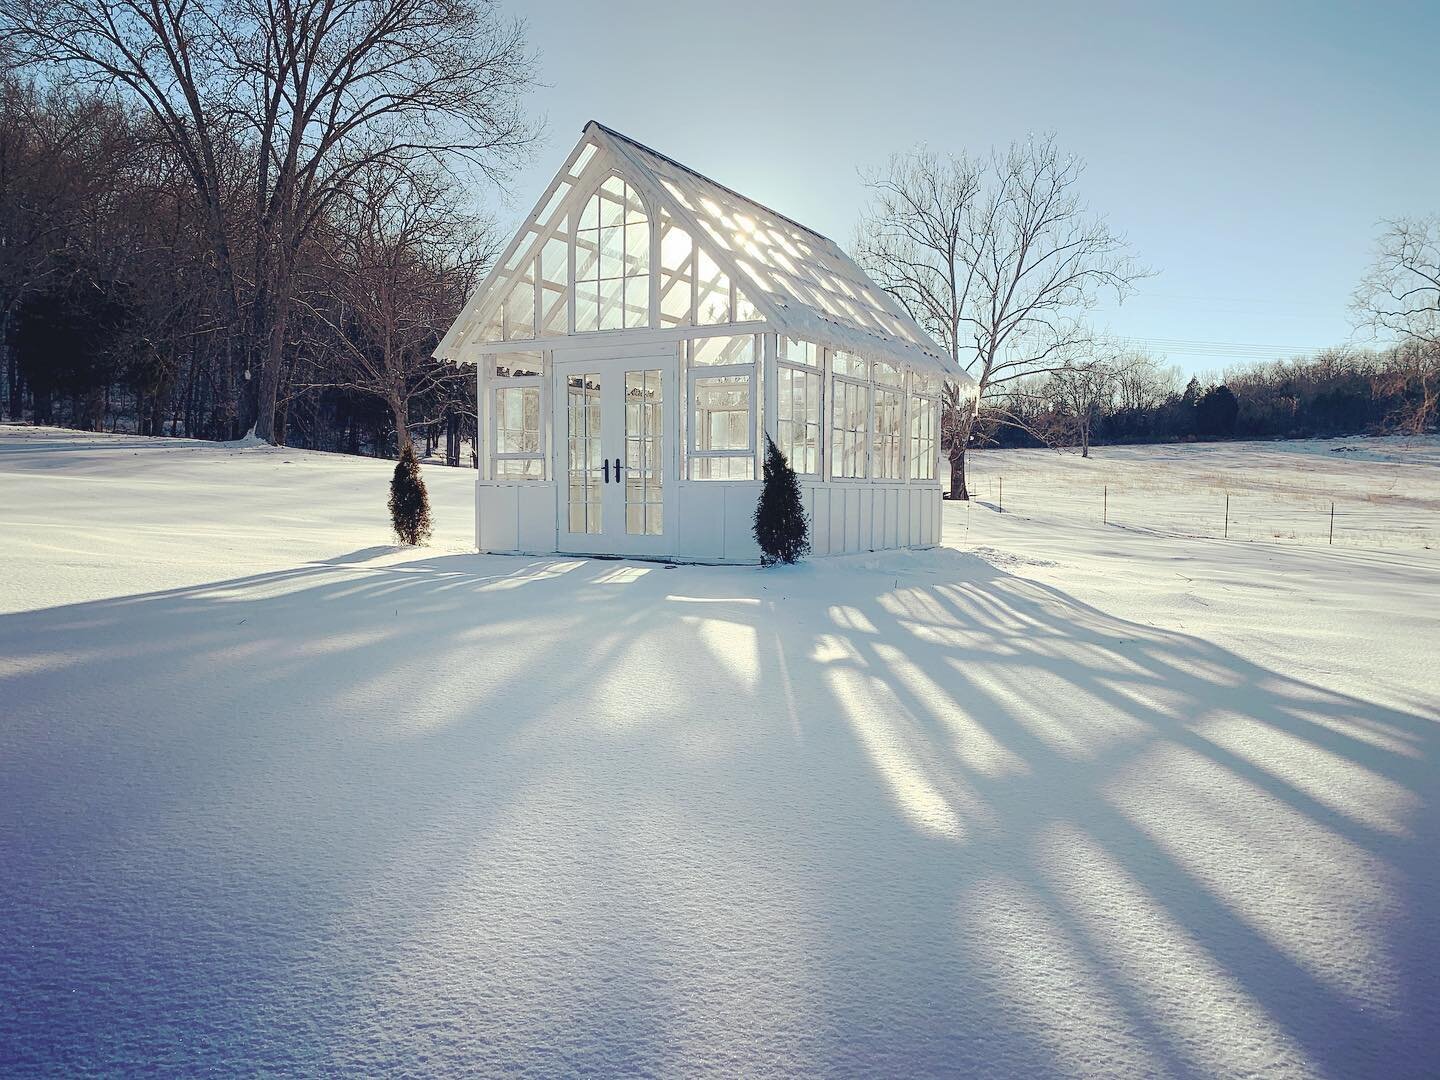 The winter lighting and shadows casted from the greenhouse this evening was absolutely beautiful! 🤍 
Chilly on the outside, warm on the inside! 

#greenhouse #sheshed #greenhouselife #greenhousegardening #recycledgreenhouse #greenhouselove #whiteonw